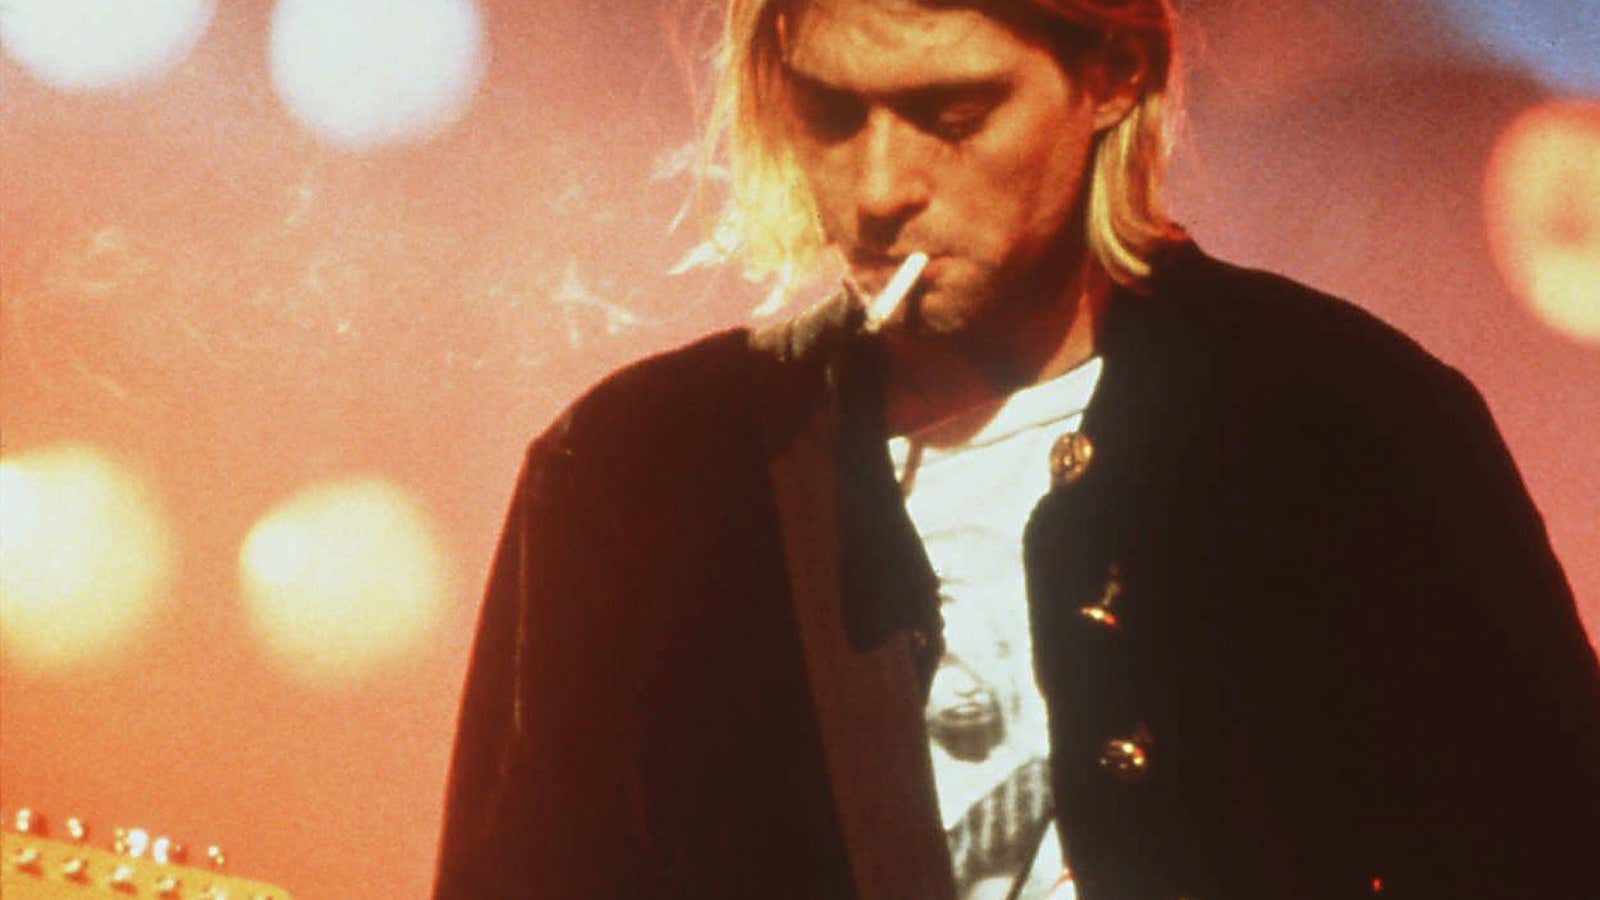 Personal essays and diary entries by depressed people have been useful in pinning down the exact relationship between depression and language, such as the work of well-known artists like Kurt Cobain.